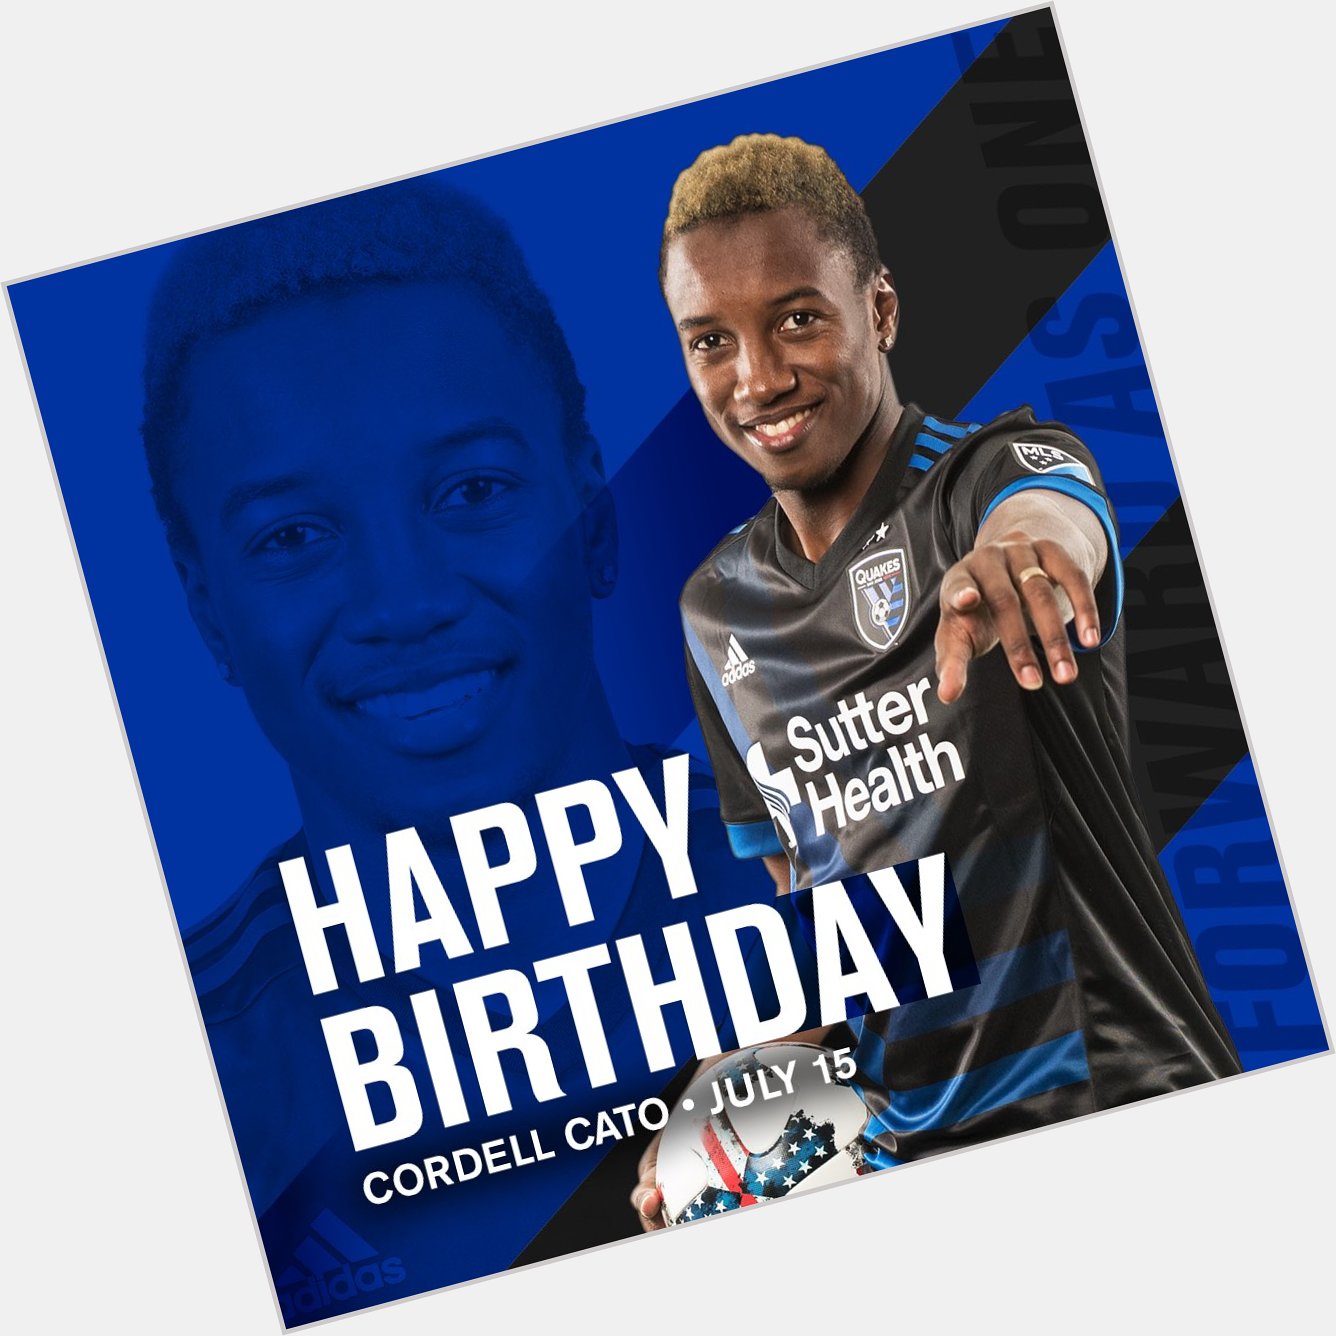 Join us in wishing Cordell Cato a very happy birthday!   